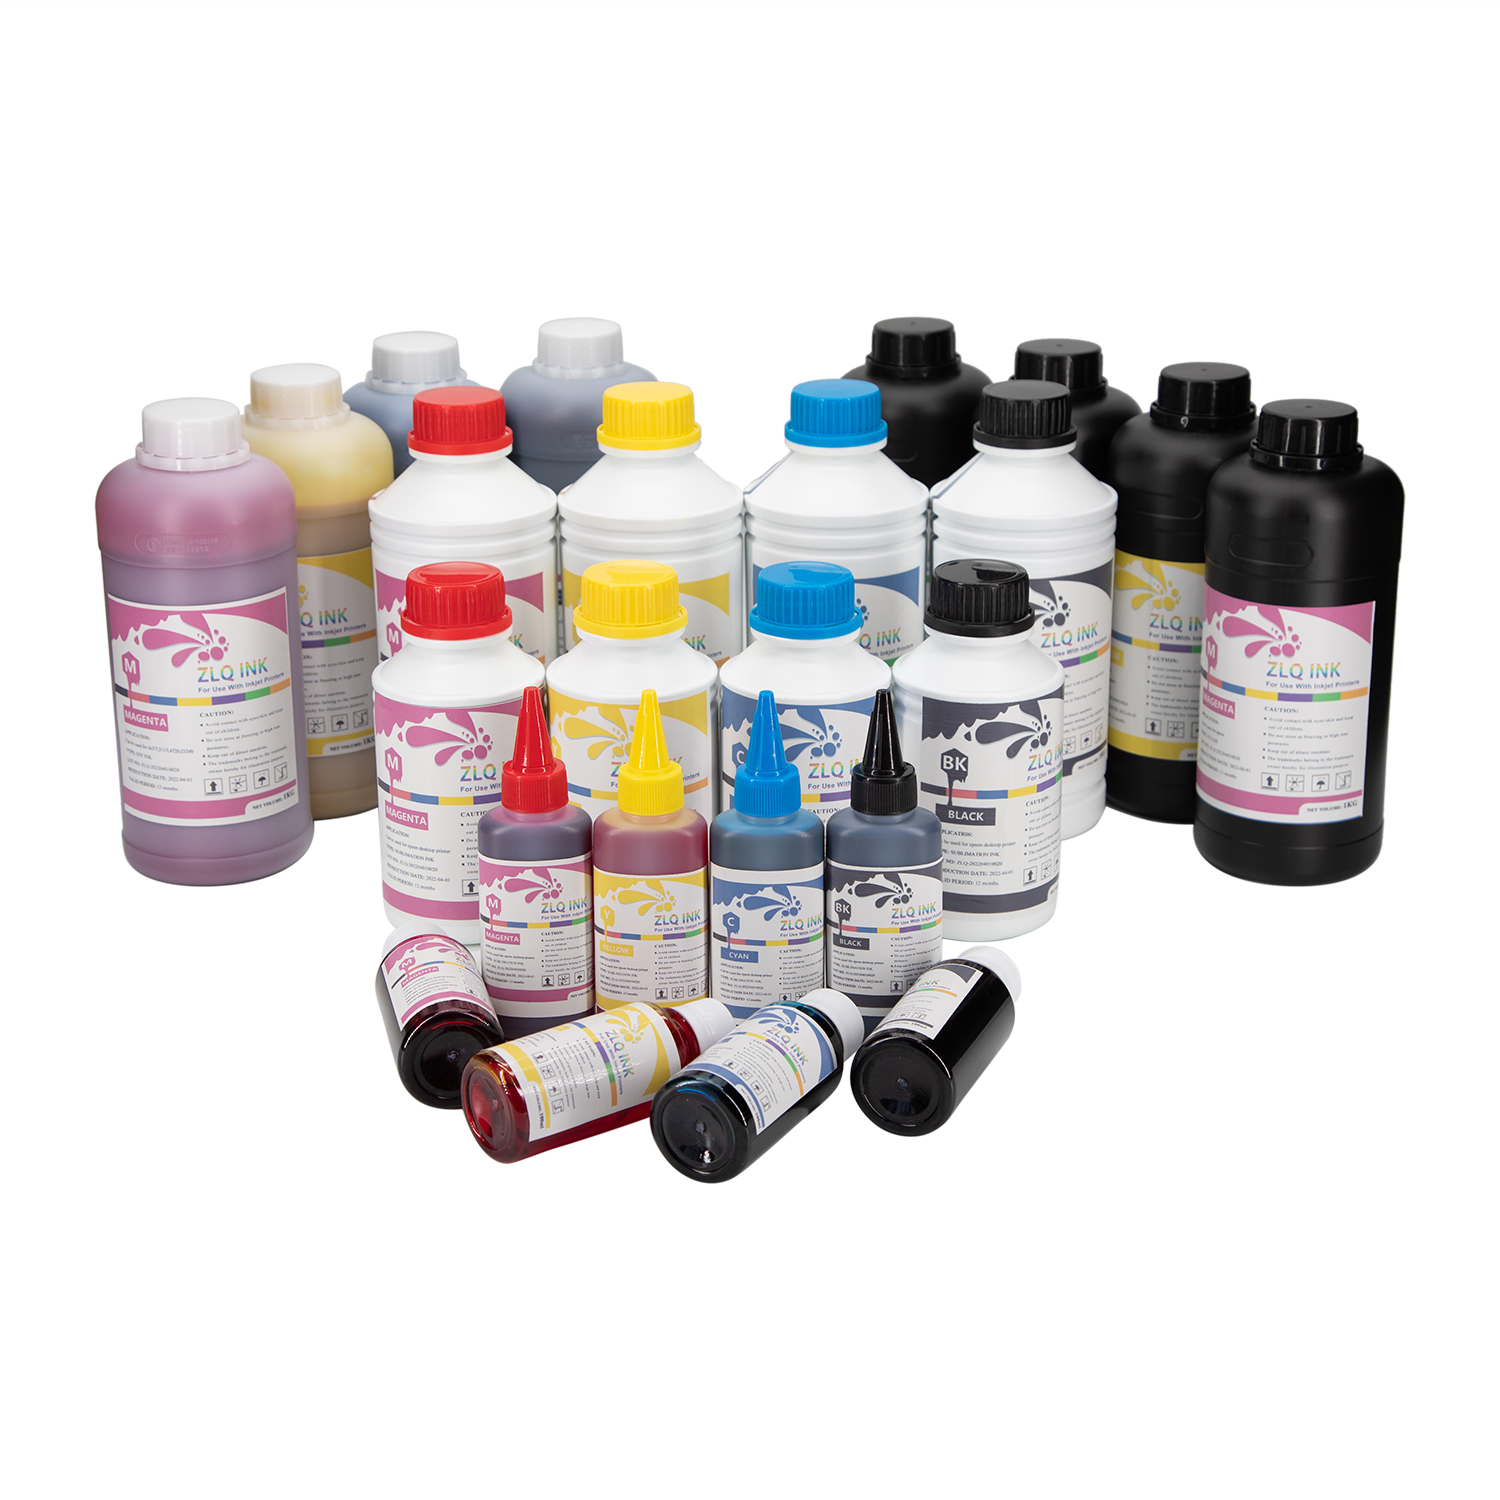 China produces high quality color dye inks for printing HOT clothing dyeing ink